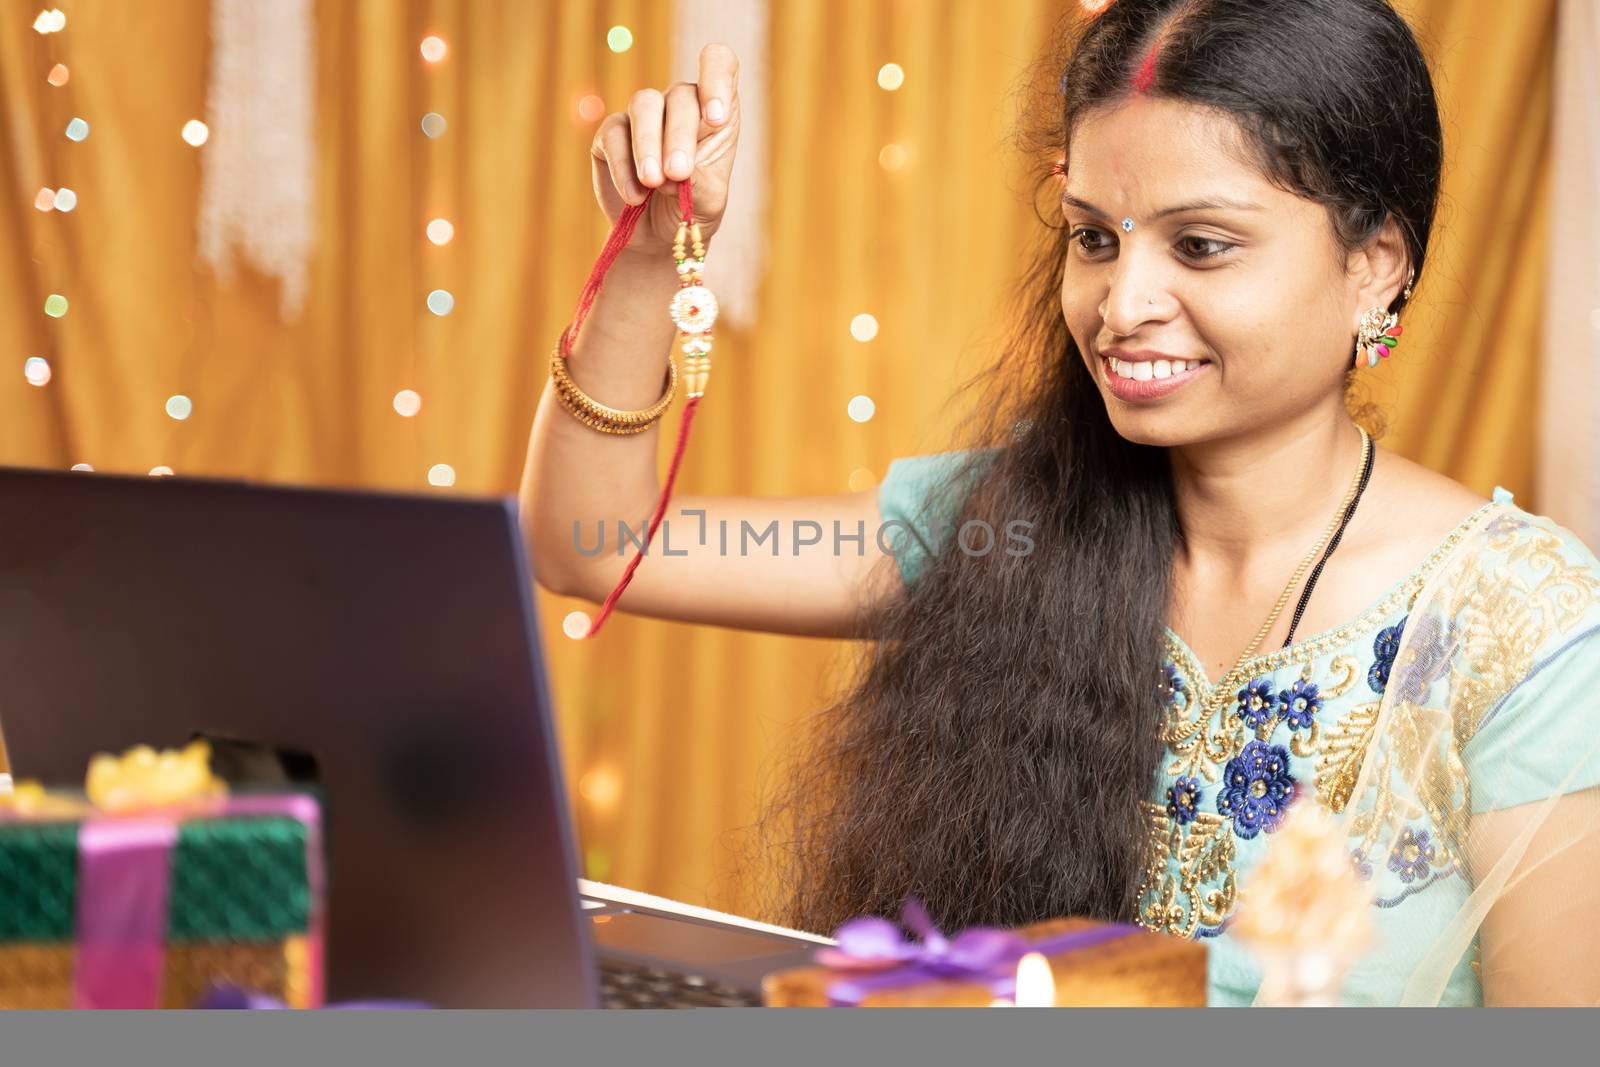 Indian Woman in tradition dress on video call or chat at Raksha Bandhan festival telling her brother to tie rakhi - Concept of distance relations, festival celebrations and technological lifestyle.